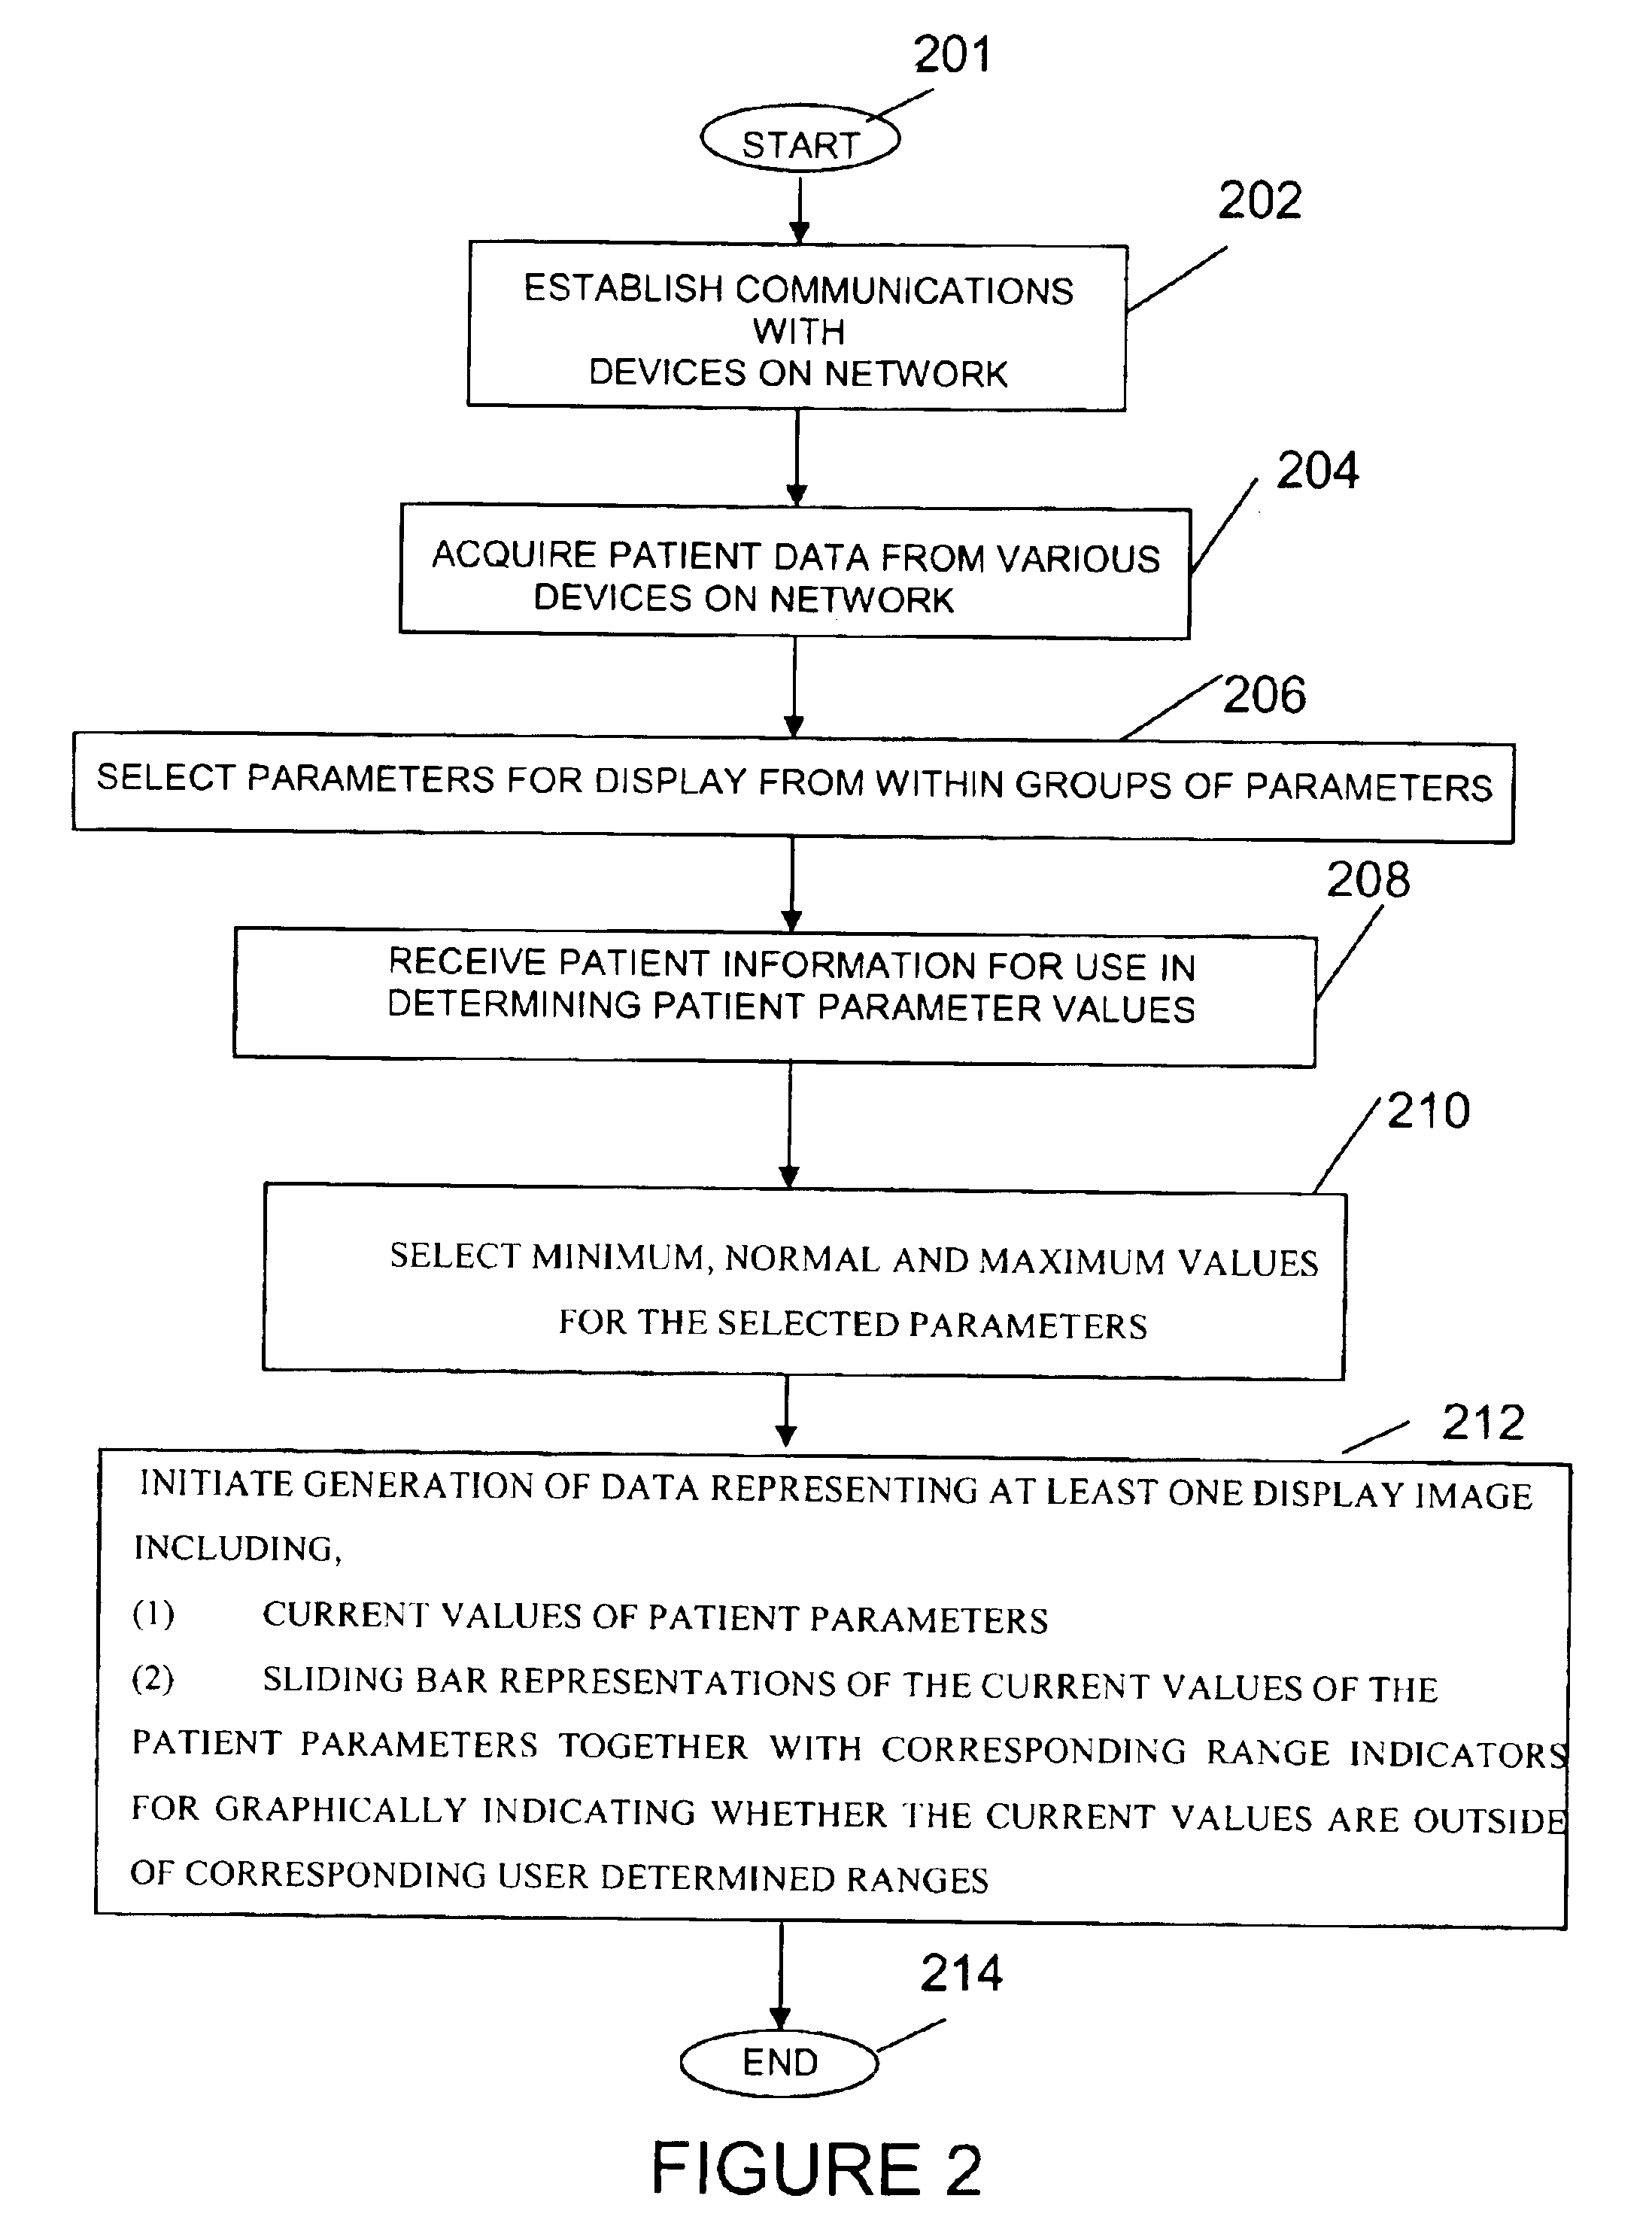 Patient medical parameter user interface system